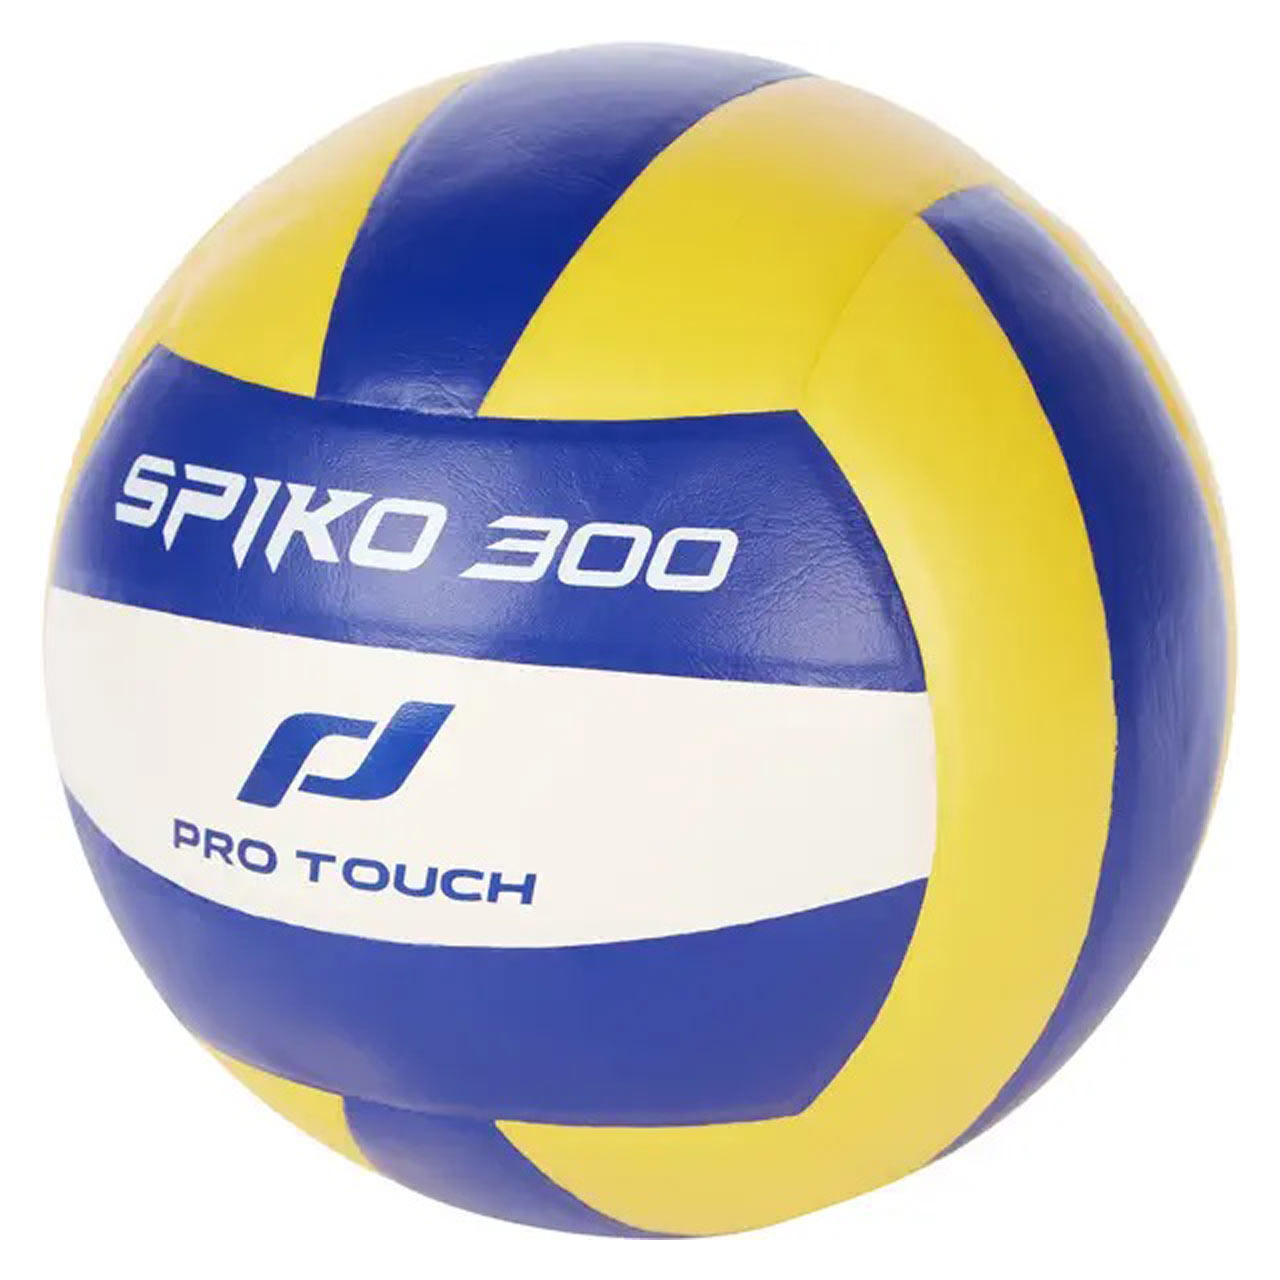 Volleyball SPIKO 300 